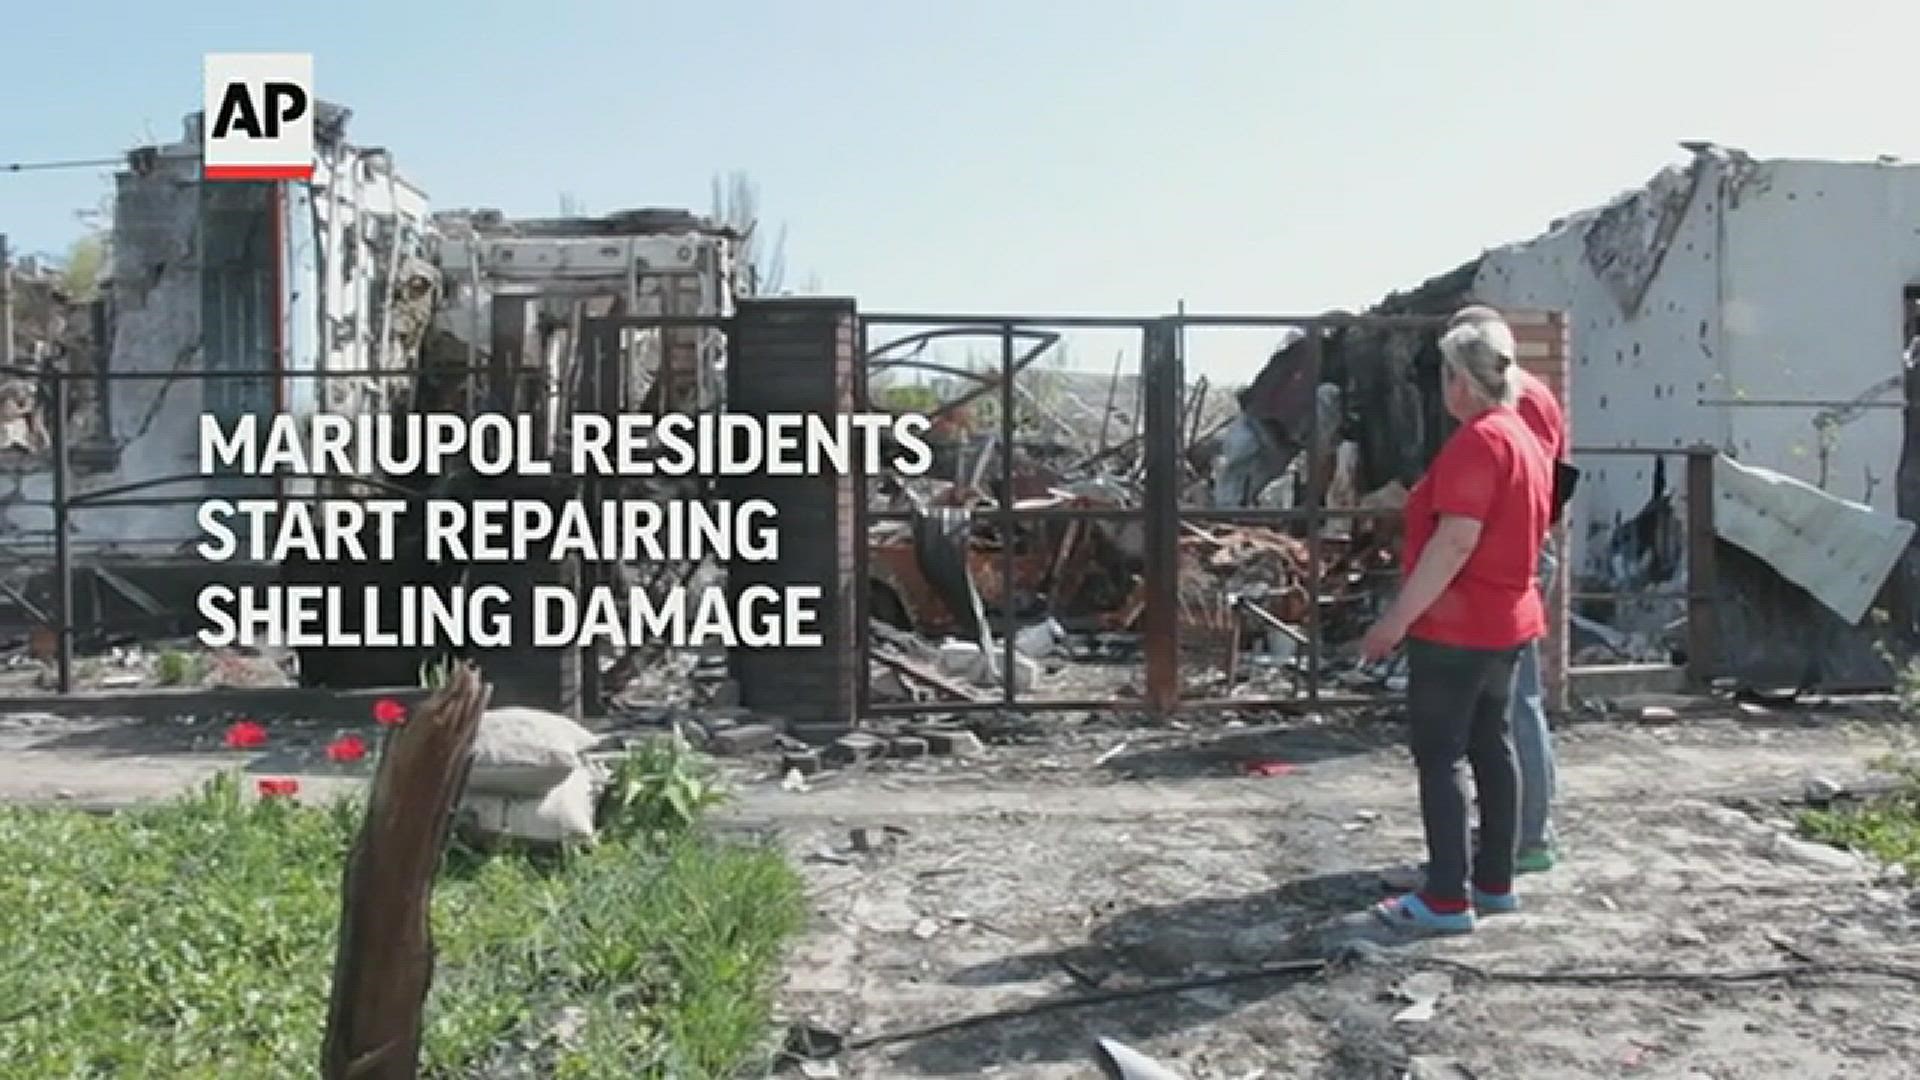 Residents in Mariupol spoke of their devastation as they returned to their dilapidated homes on Monday.